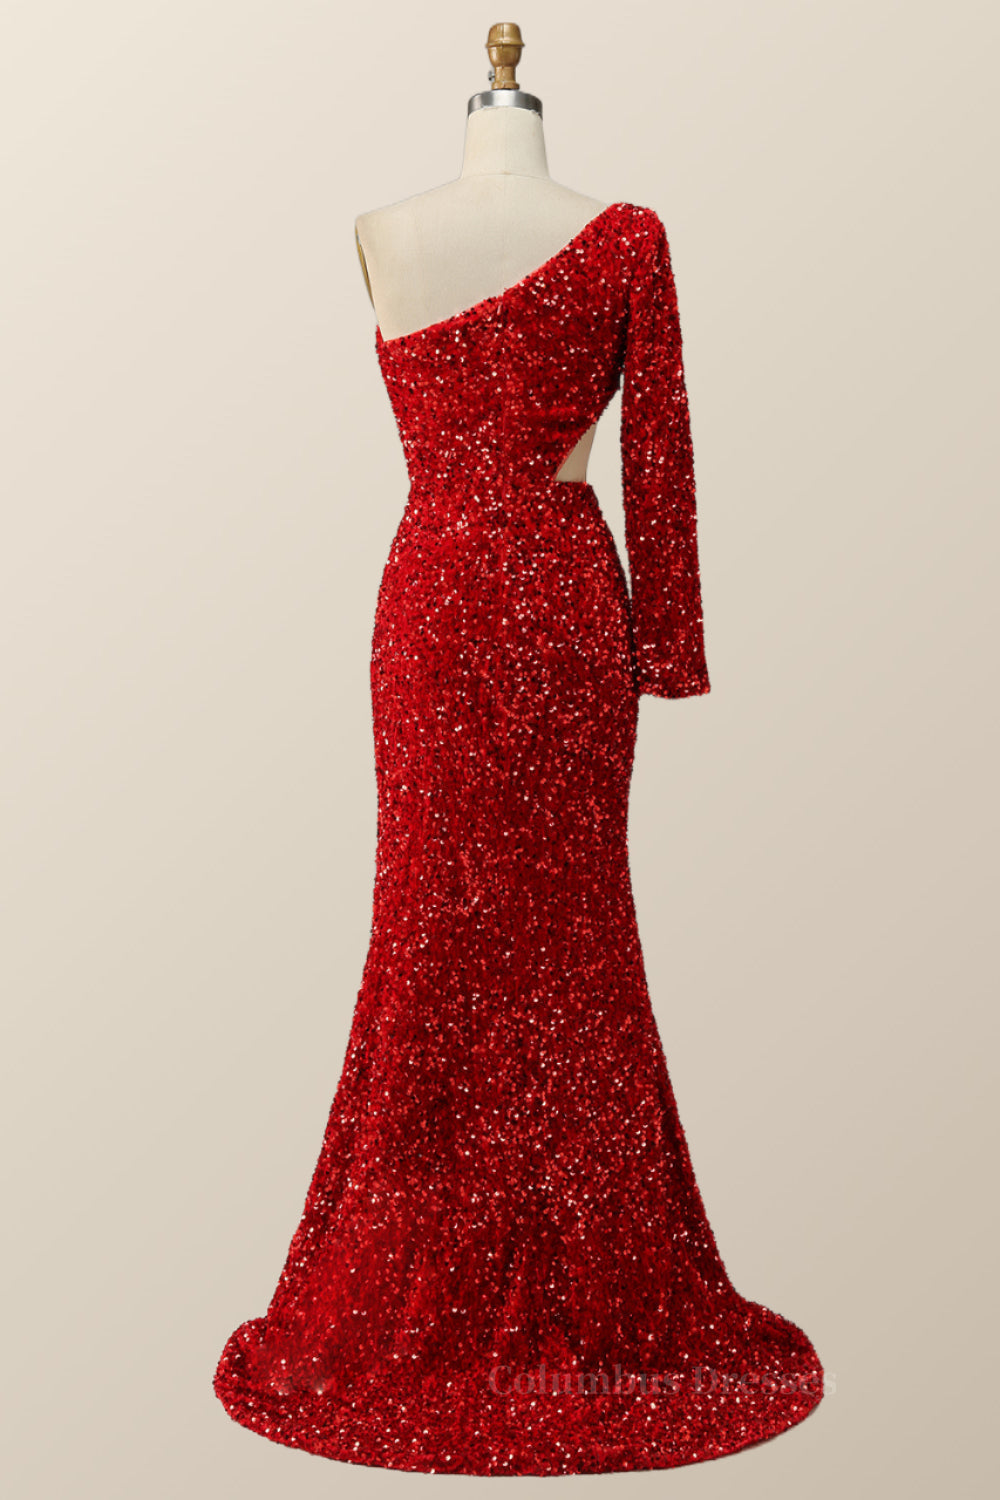 Formal Dress For Beach Wedding, One Shoulder Long Sleeve Red Sequin Mermaid Party Dress